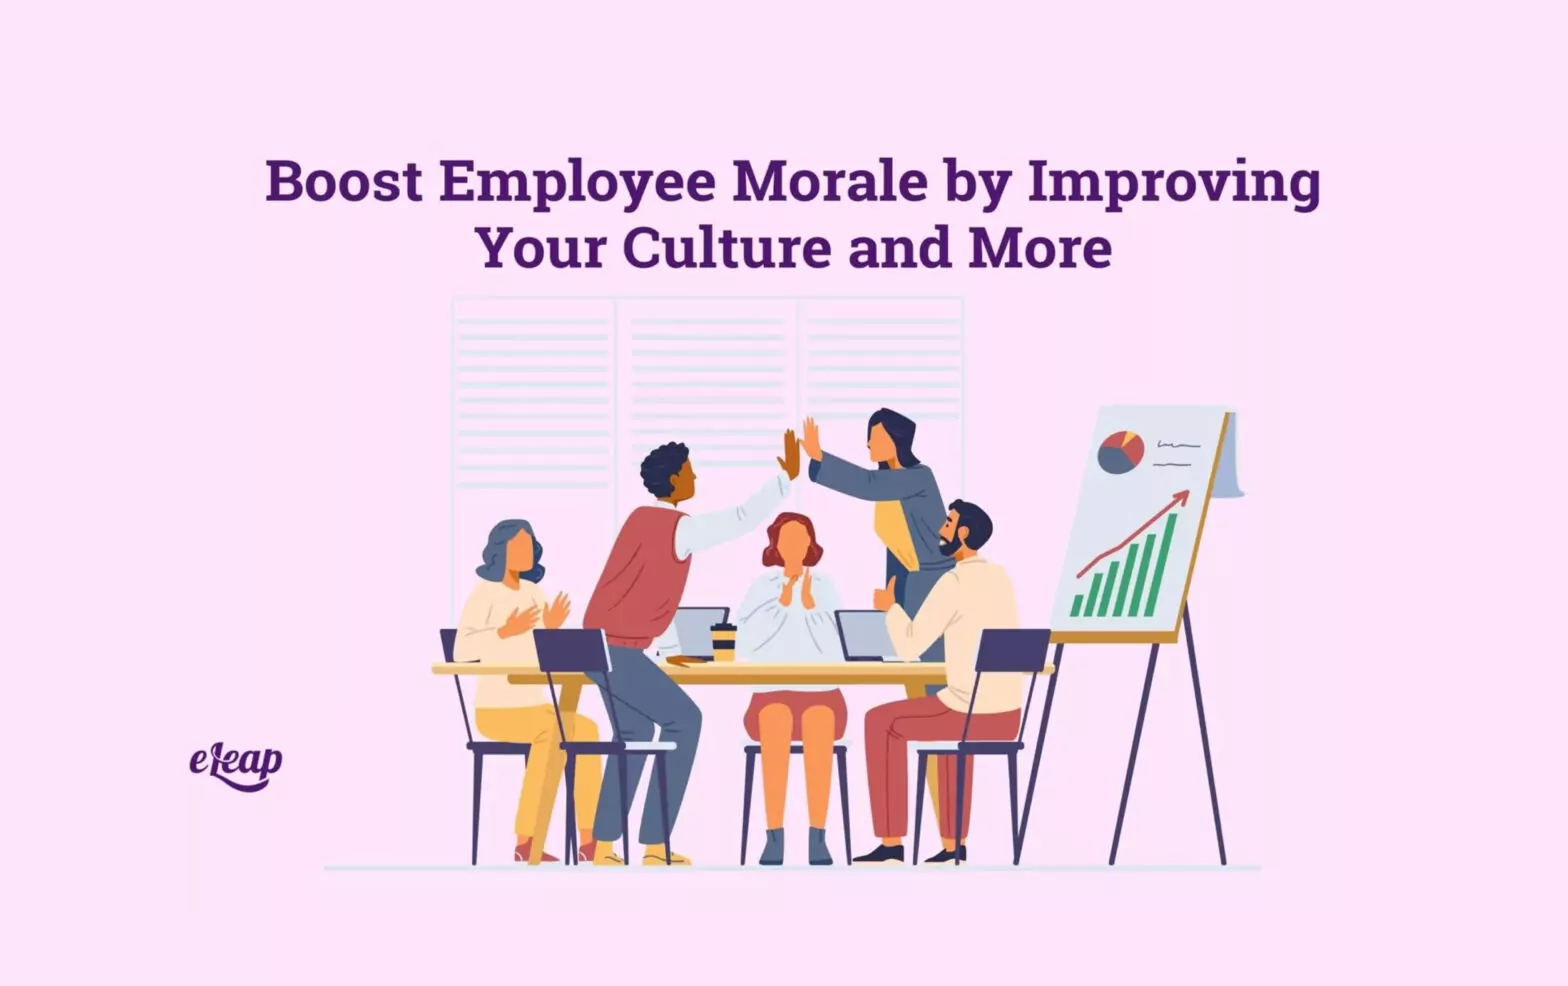 Boost Employee Morale by Improving Your Culture and More